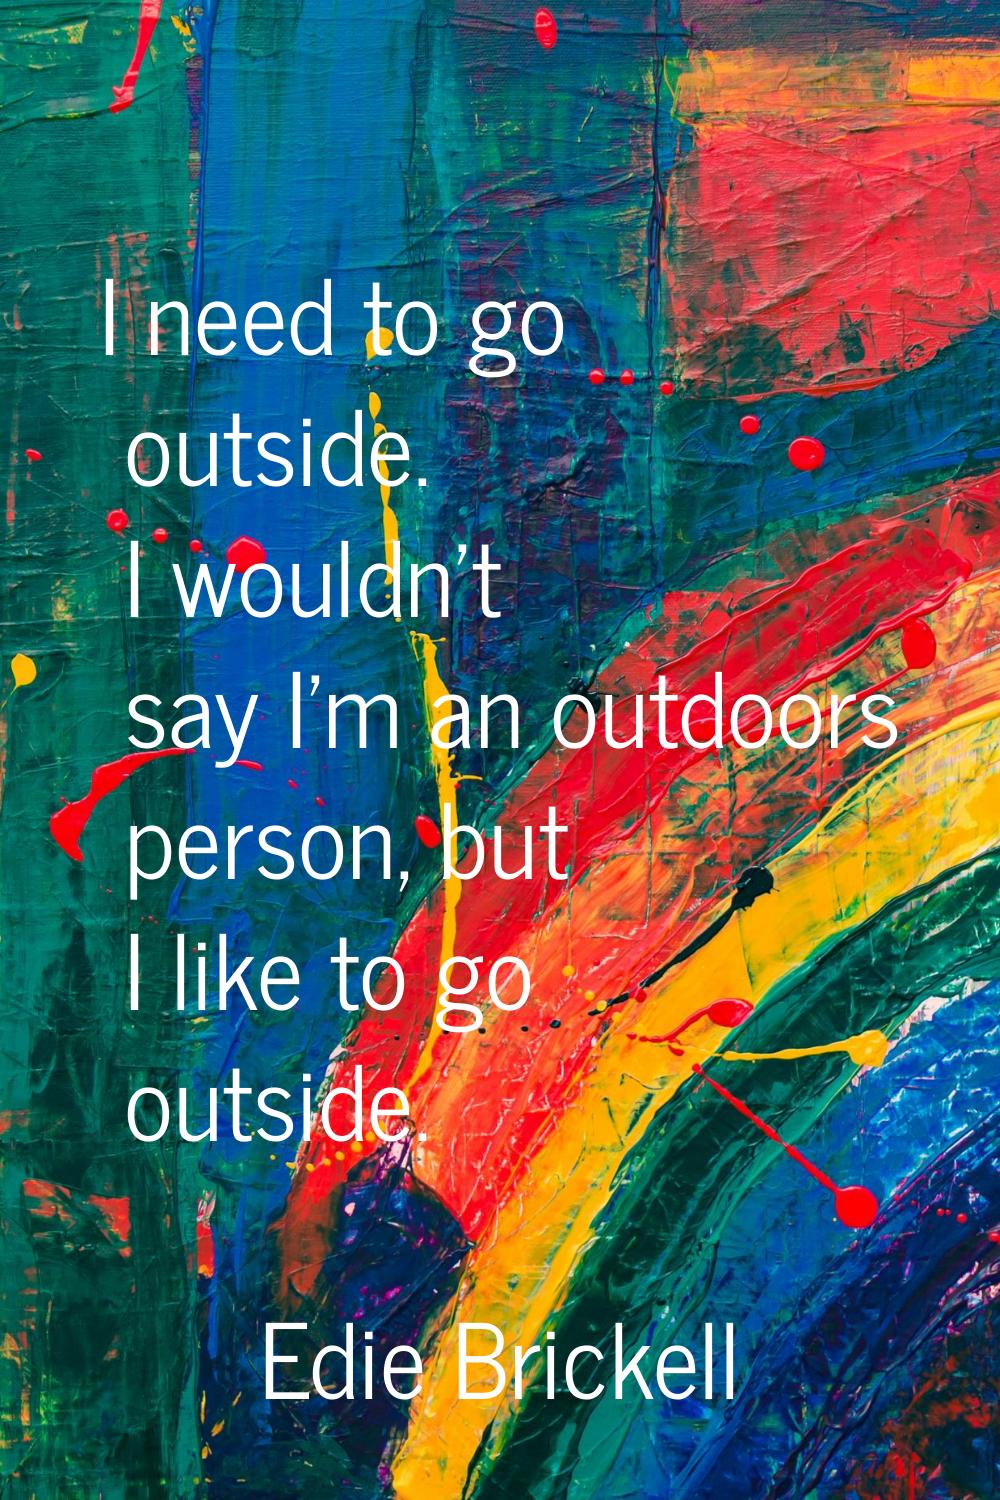 I need to go outside. I wouldn't say I'm an outdoors person, but I like to go outside.